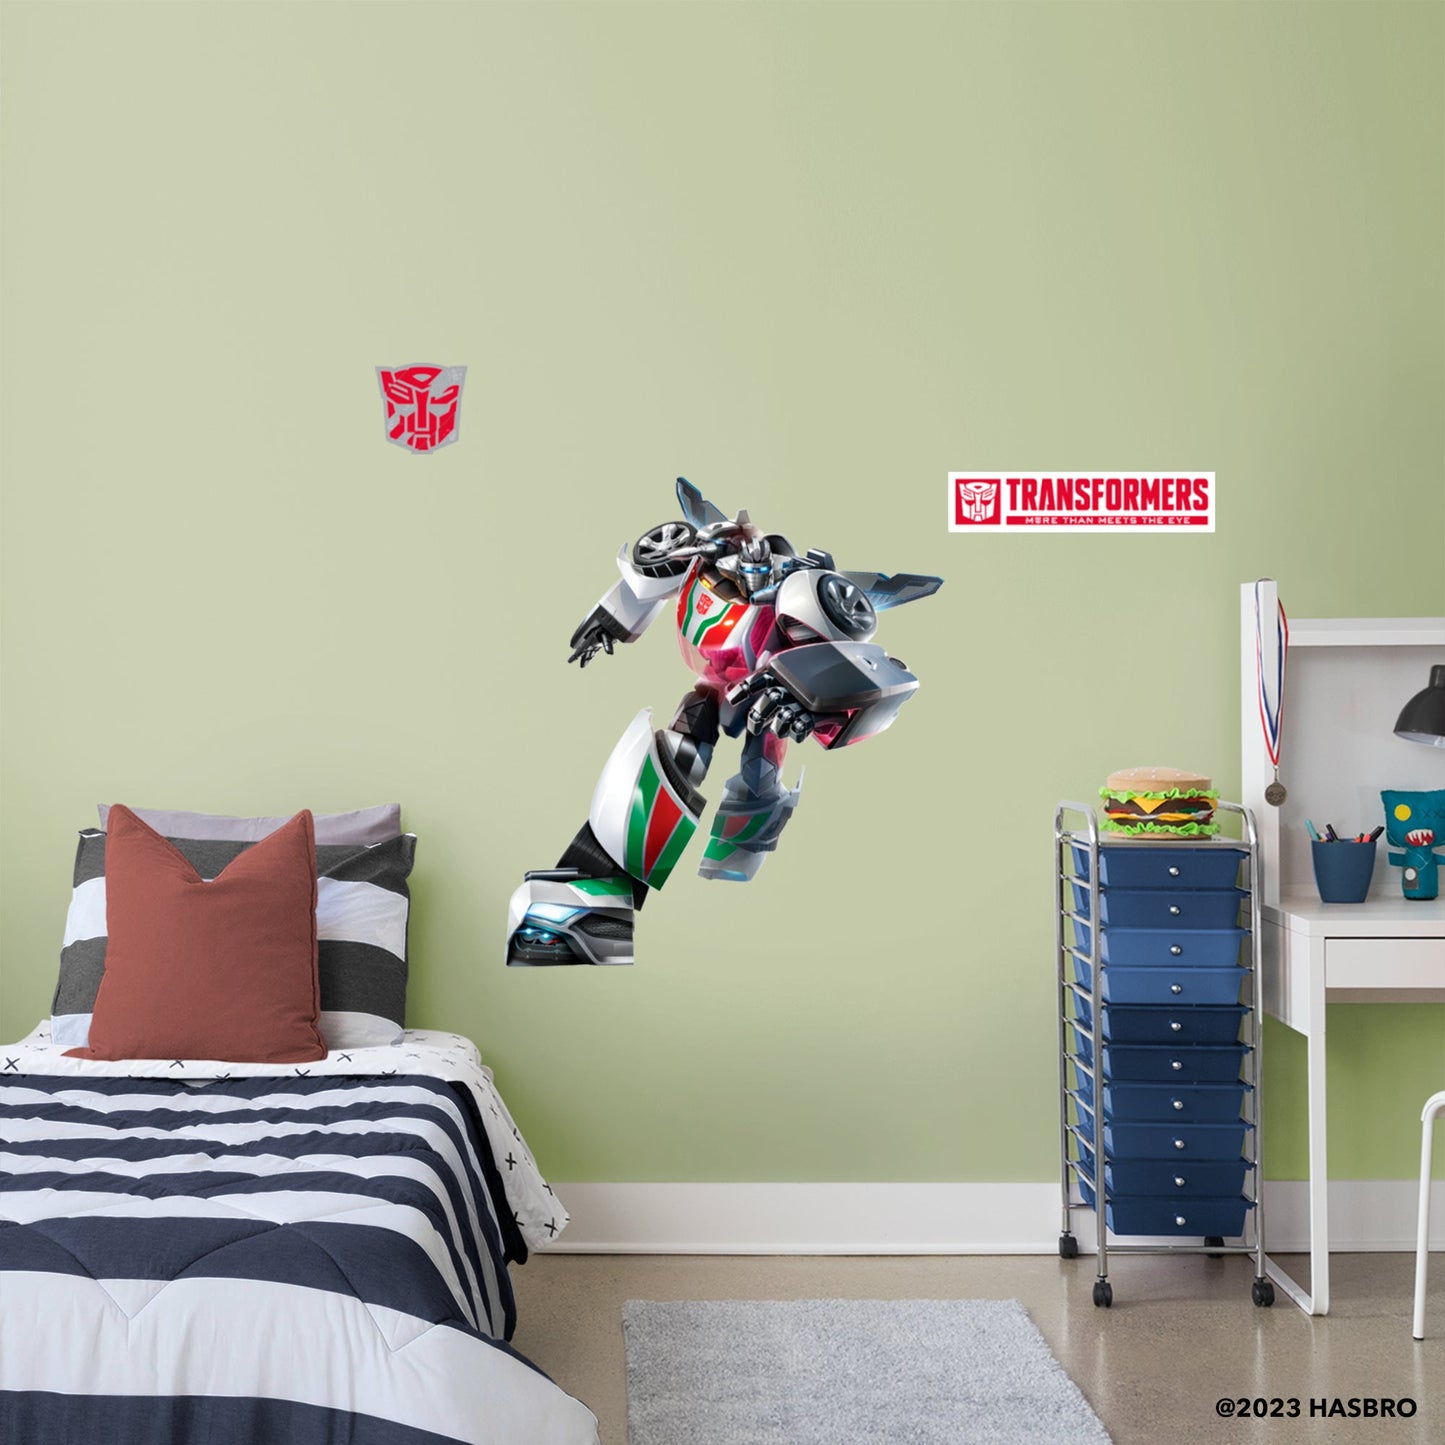 Transformers: Wheeljack RealBig - Officially Licensed Hasbro Removable Adhesive Decal